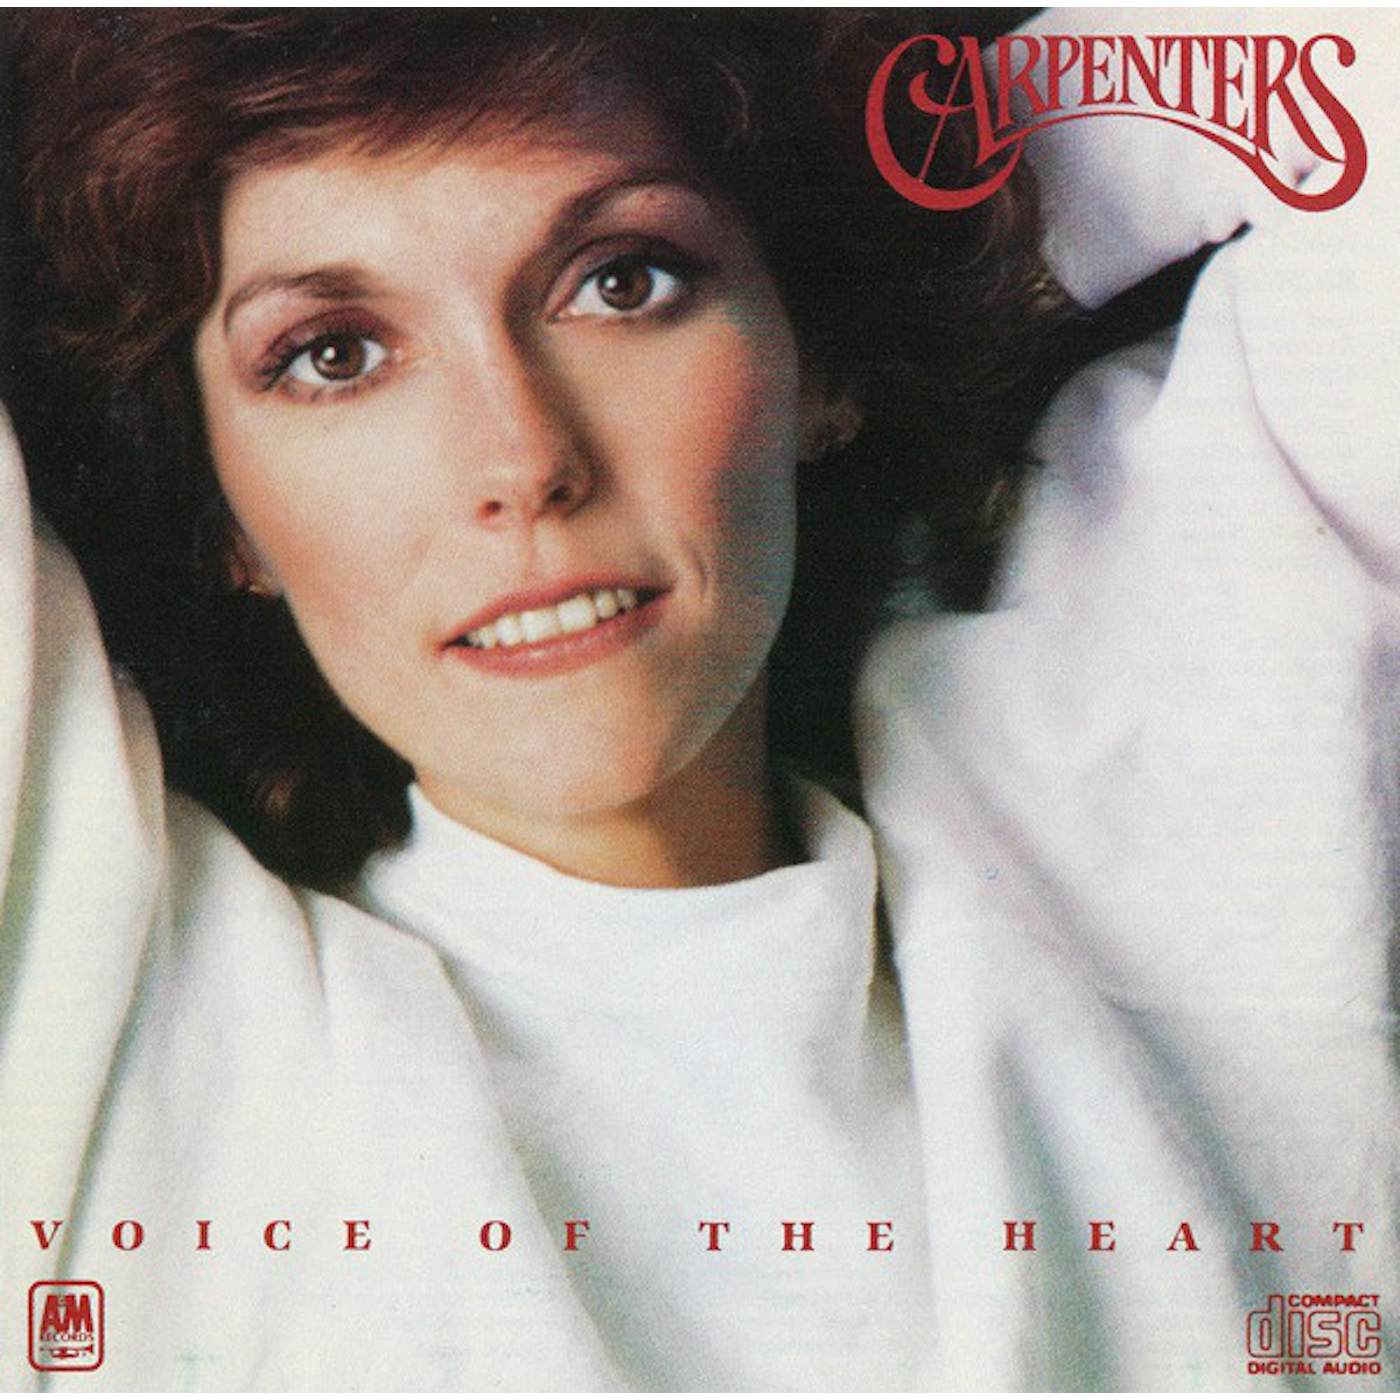 Carpenters VOICE OF THE HEART CD